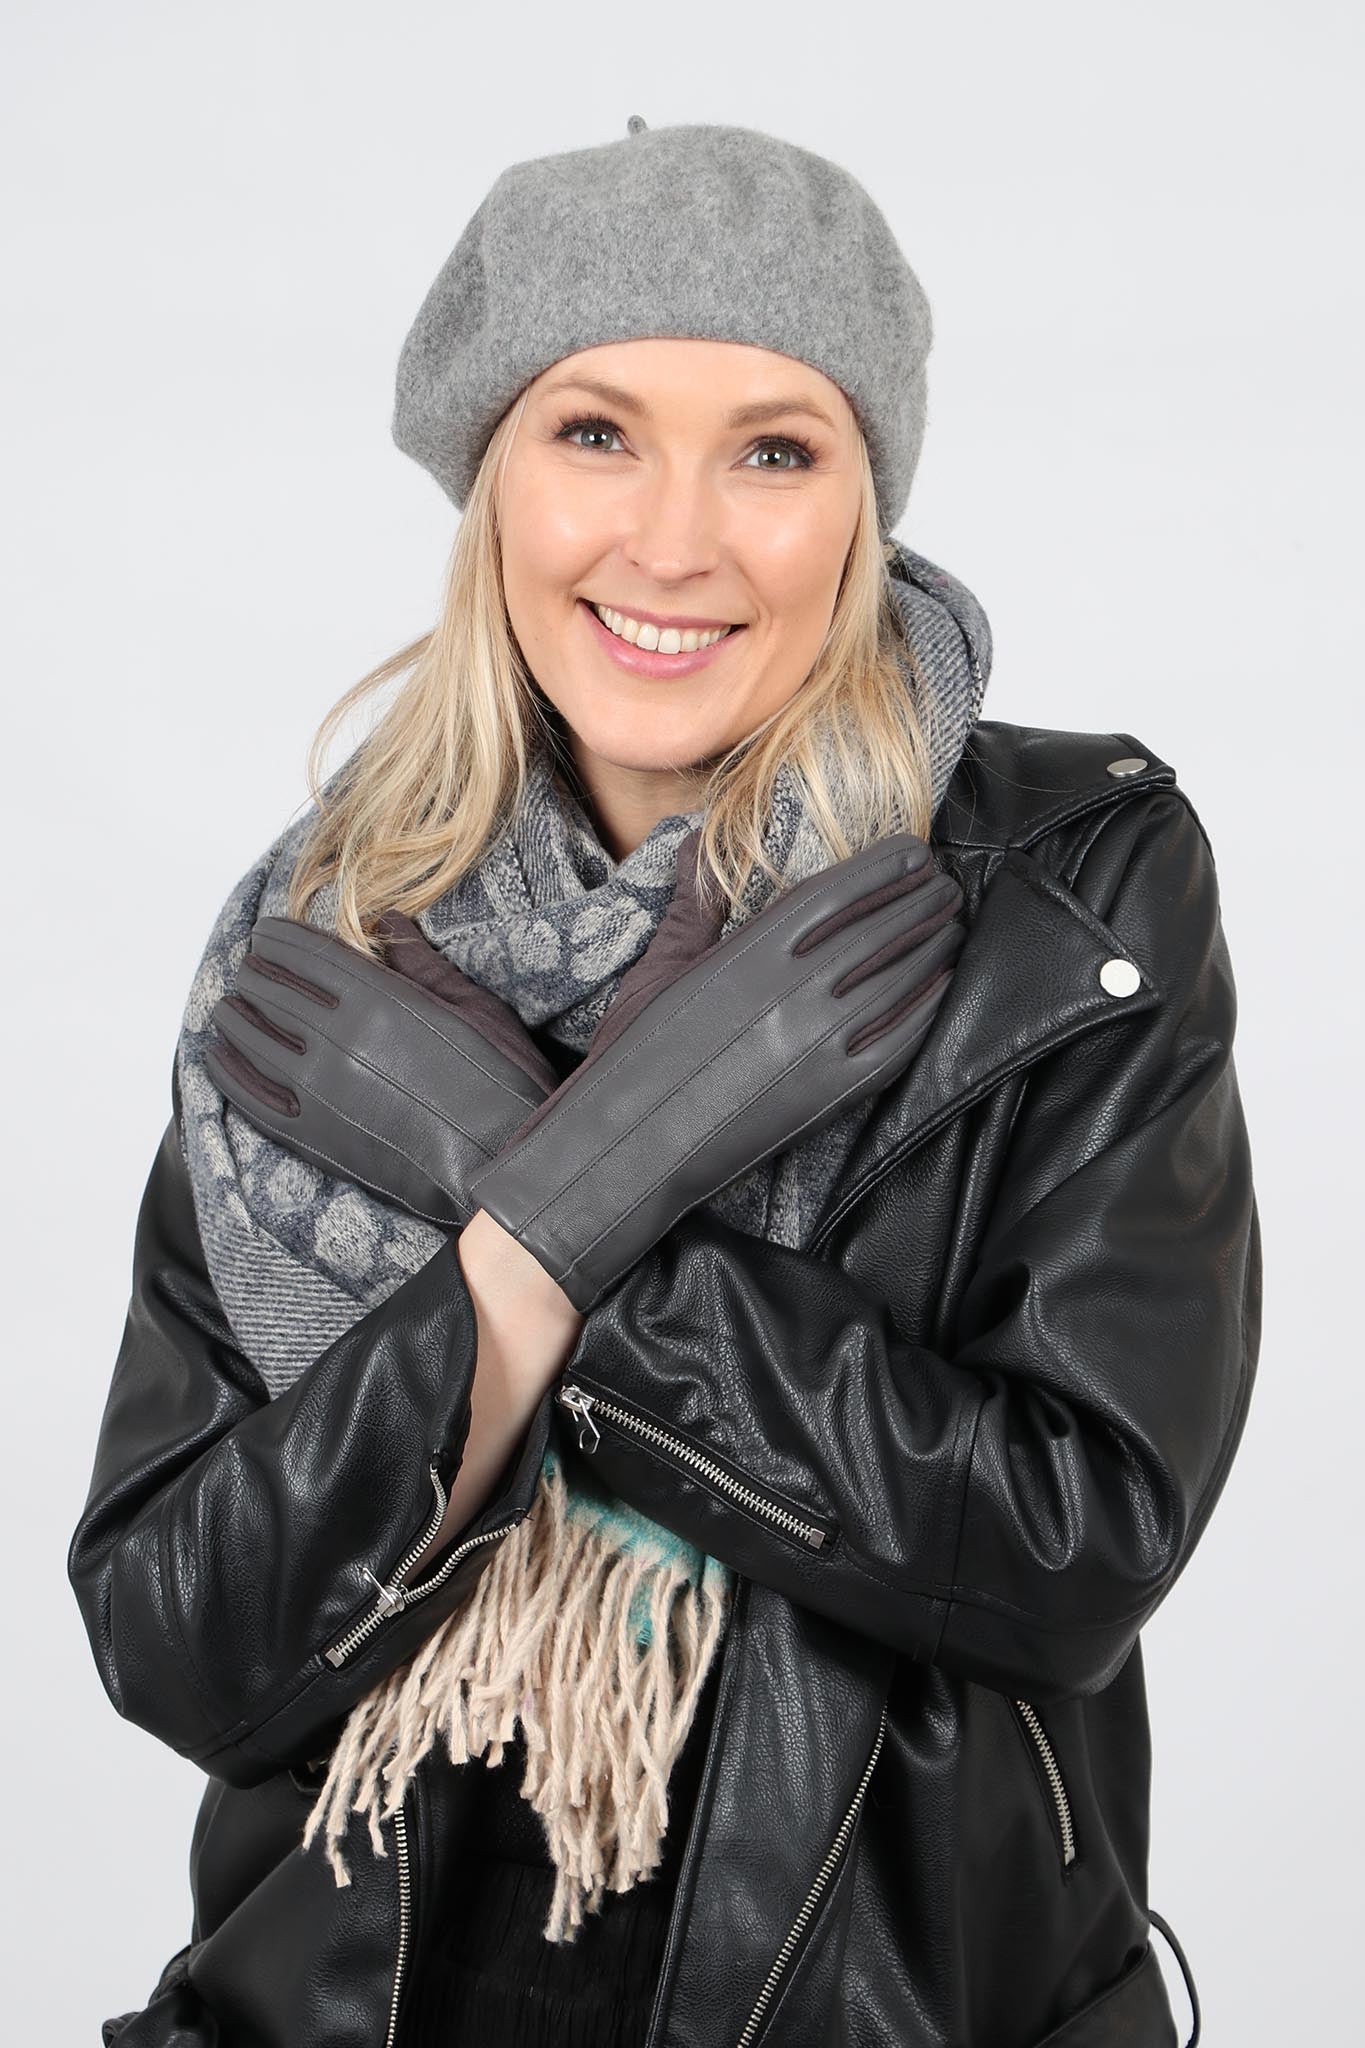 model wearing a grey beret hat with other winter accessories